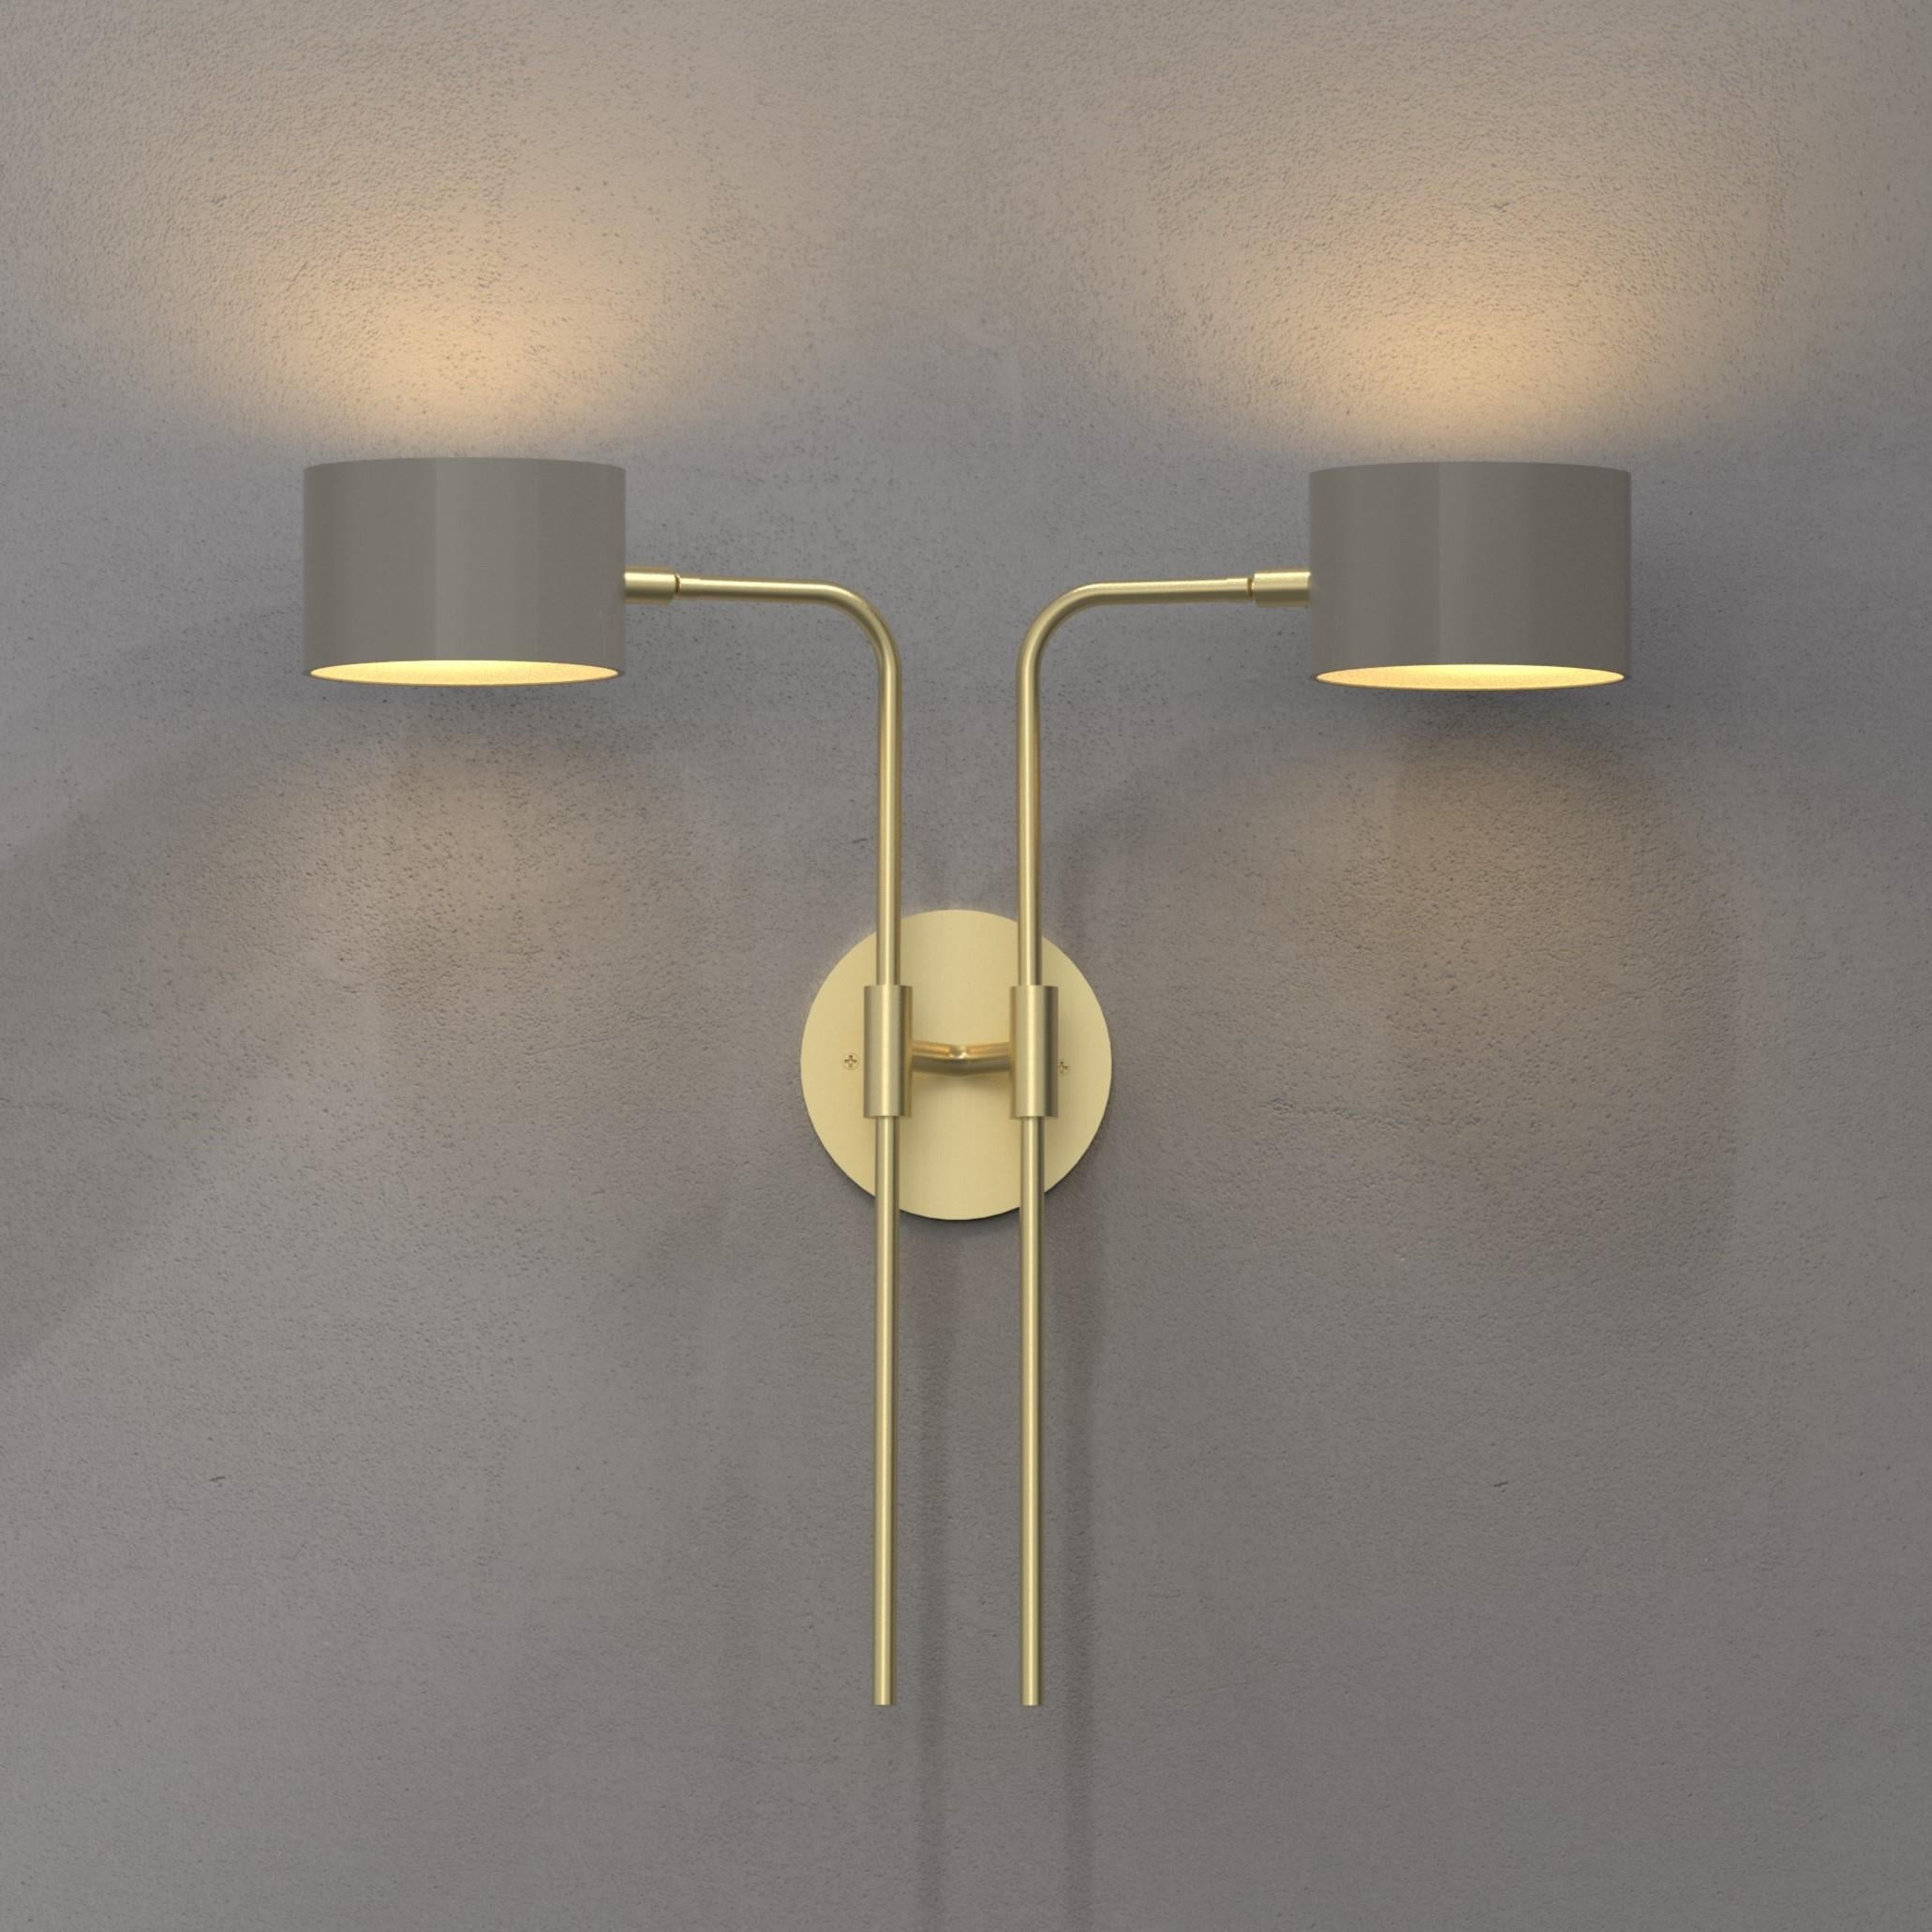 Cilindro 2 Wall Light in Enamel & Brass by Blueprint Lighting In New Condition For Sale In New York, NY